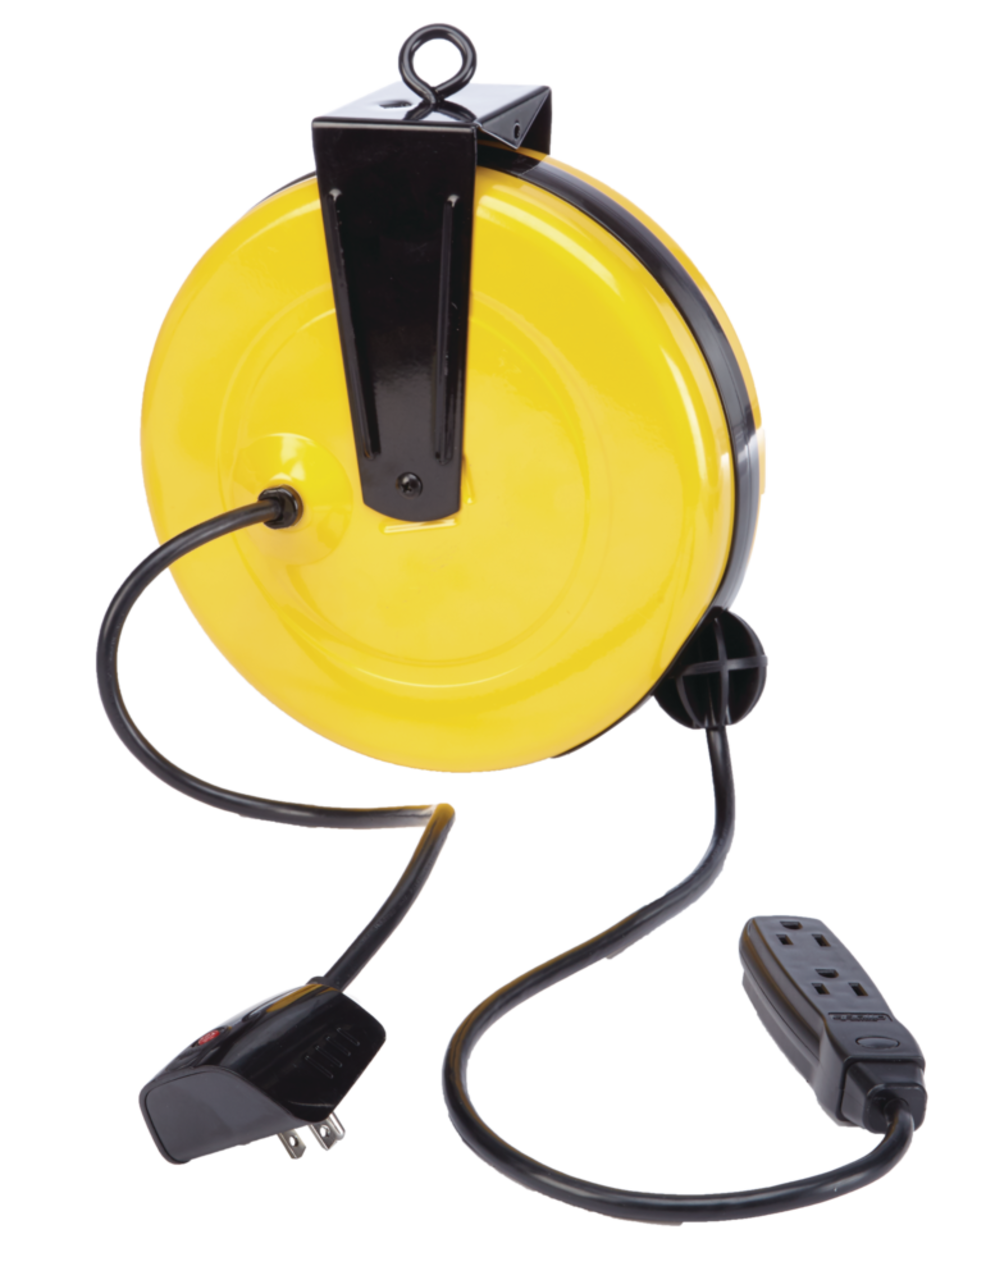 Retractable extension cord - DDL Wiki